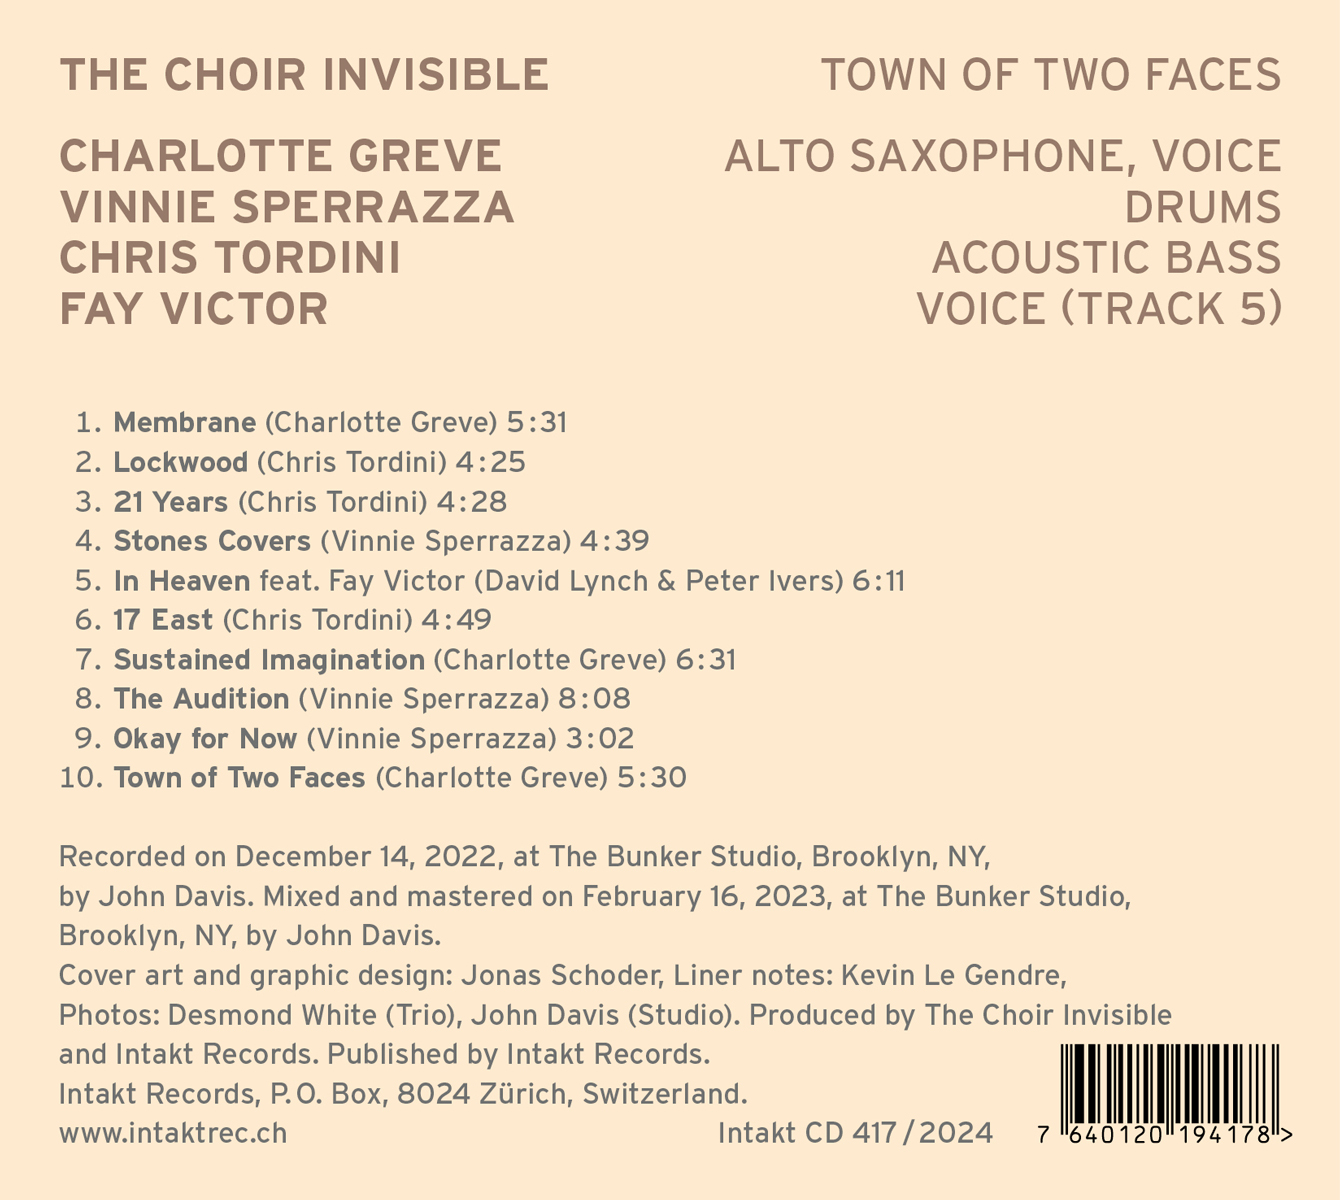 THE CHOIR INVISIBLE. TOWN OF TWO FACES. cover back intakt records